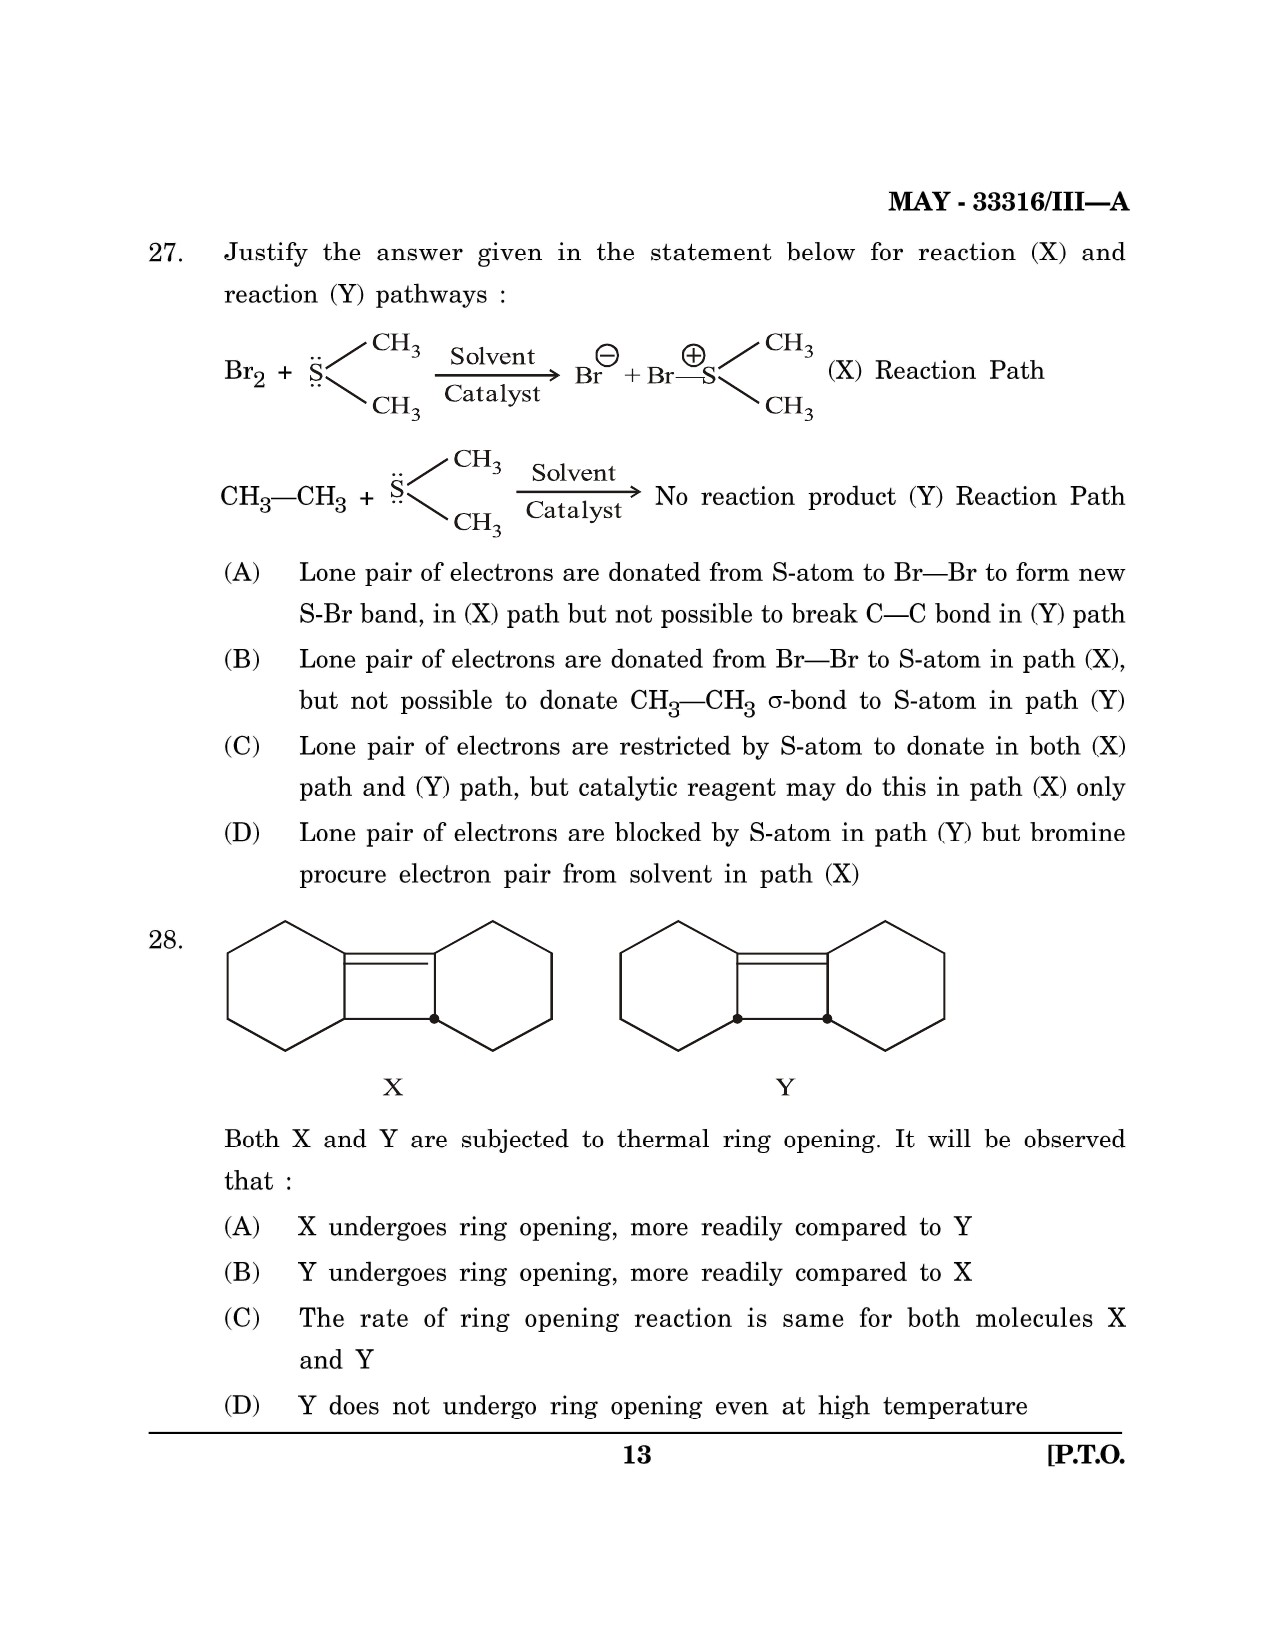 Maharashtra SET Chemical Sciences Question Paper III May 2016 12